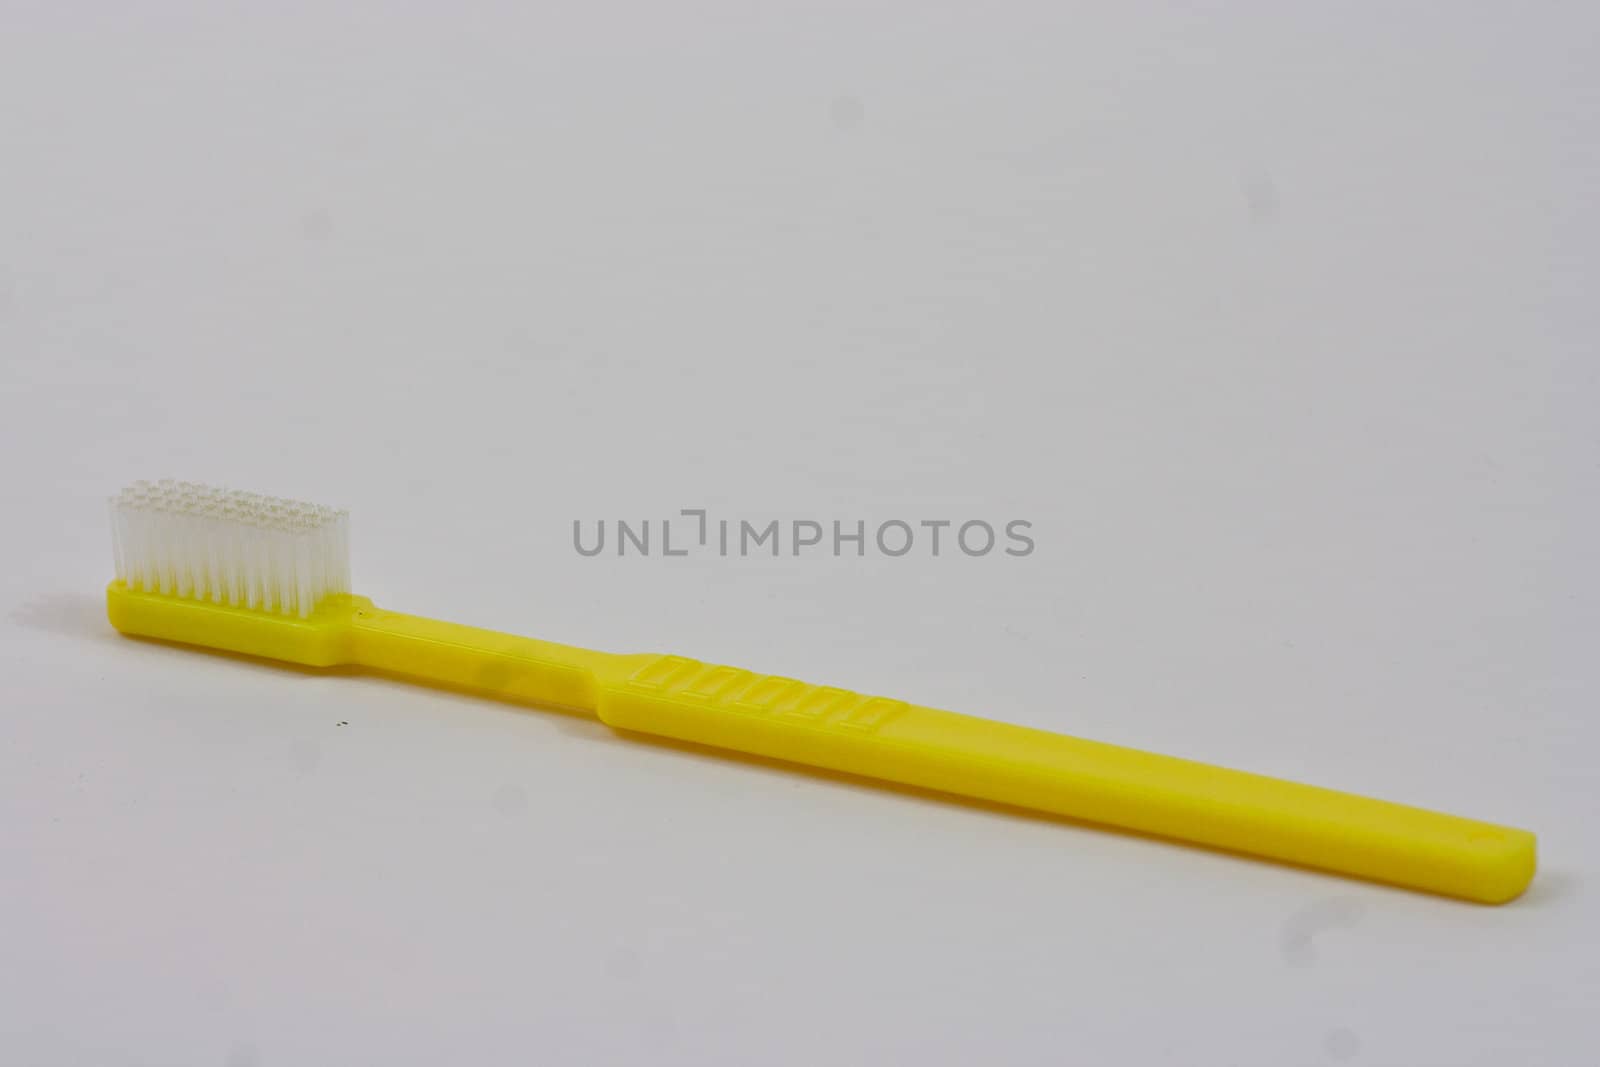 Plain yellow Truthbrush on a white background.